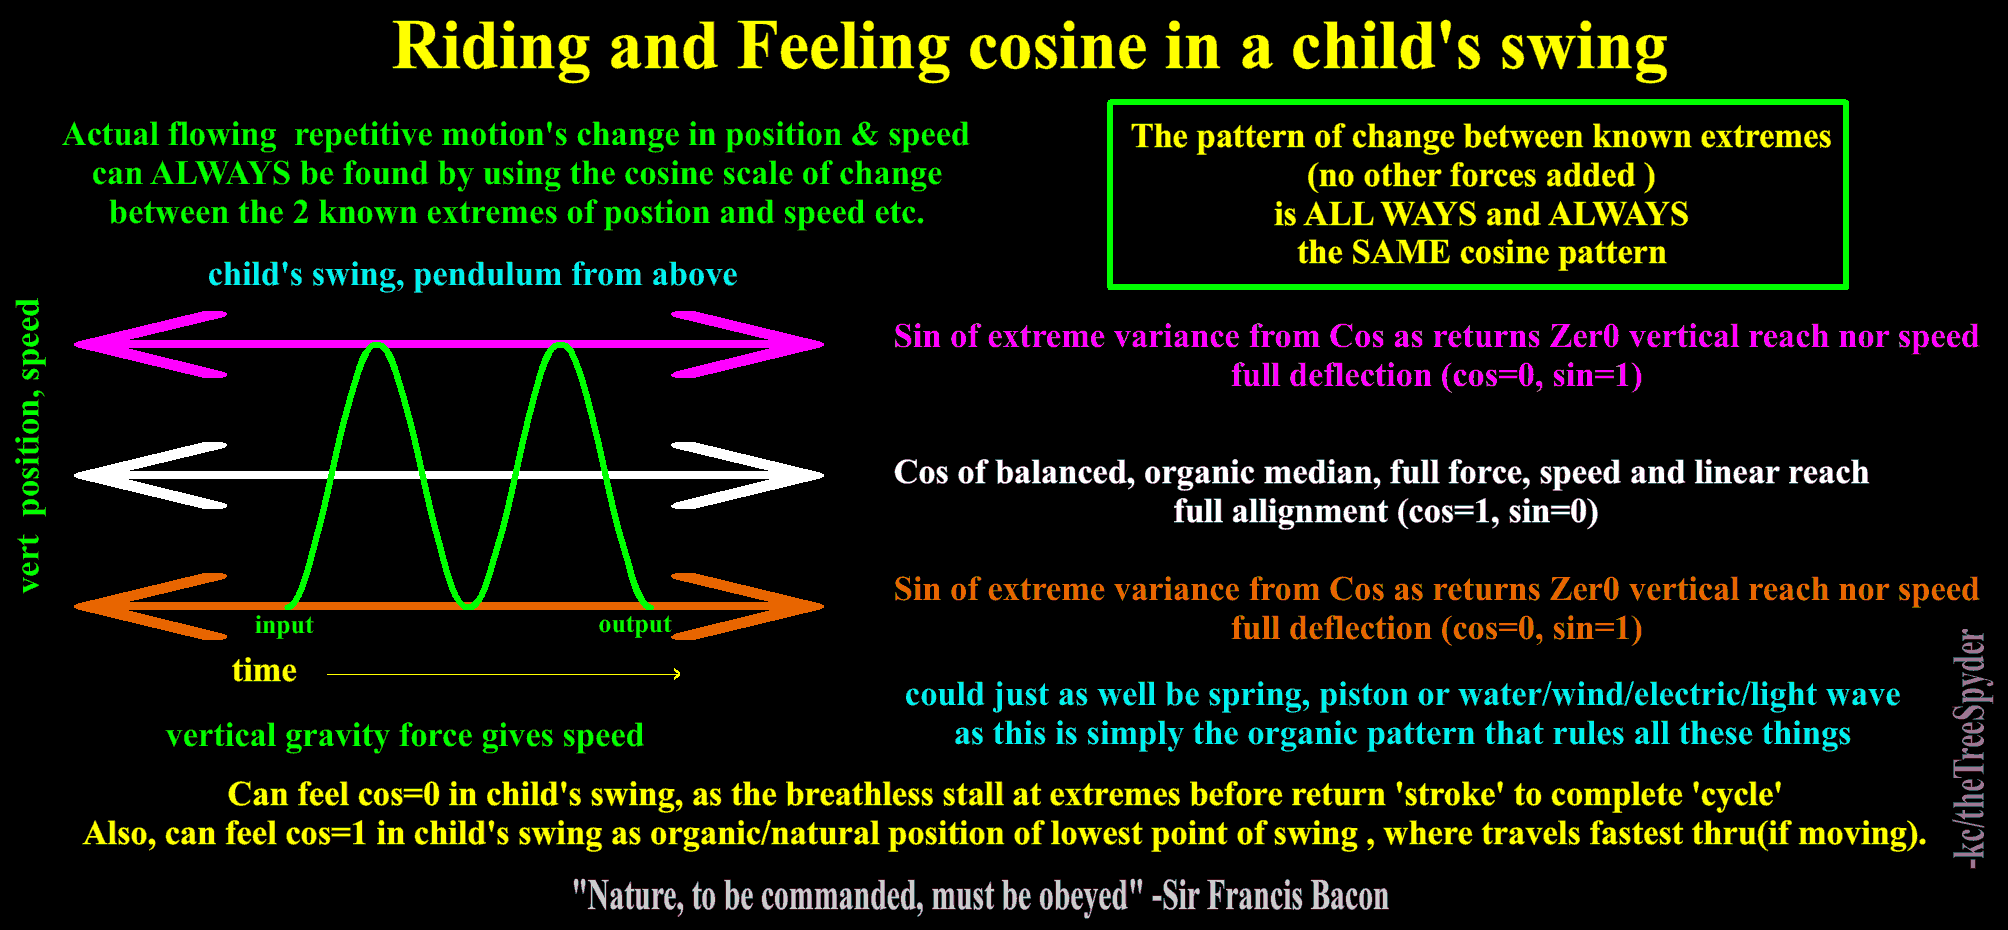 Riding-and-feeling-cosine-in-a-childs-swing.png